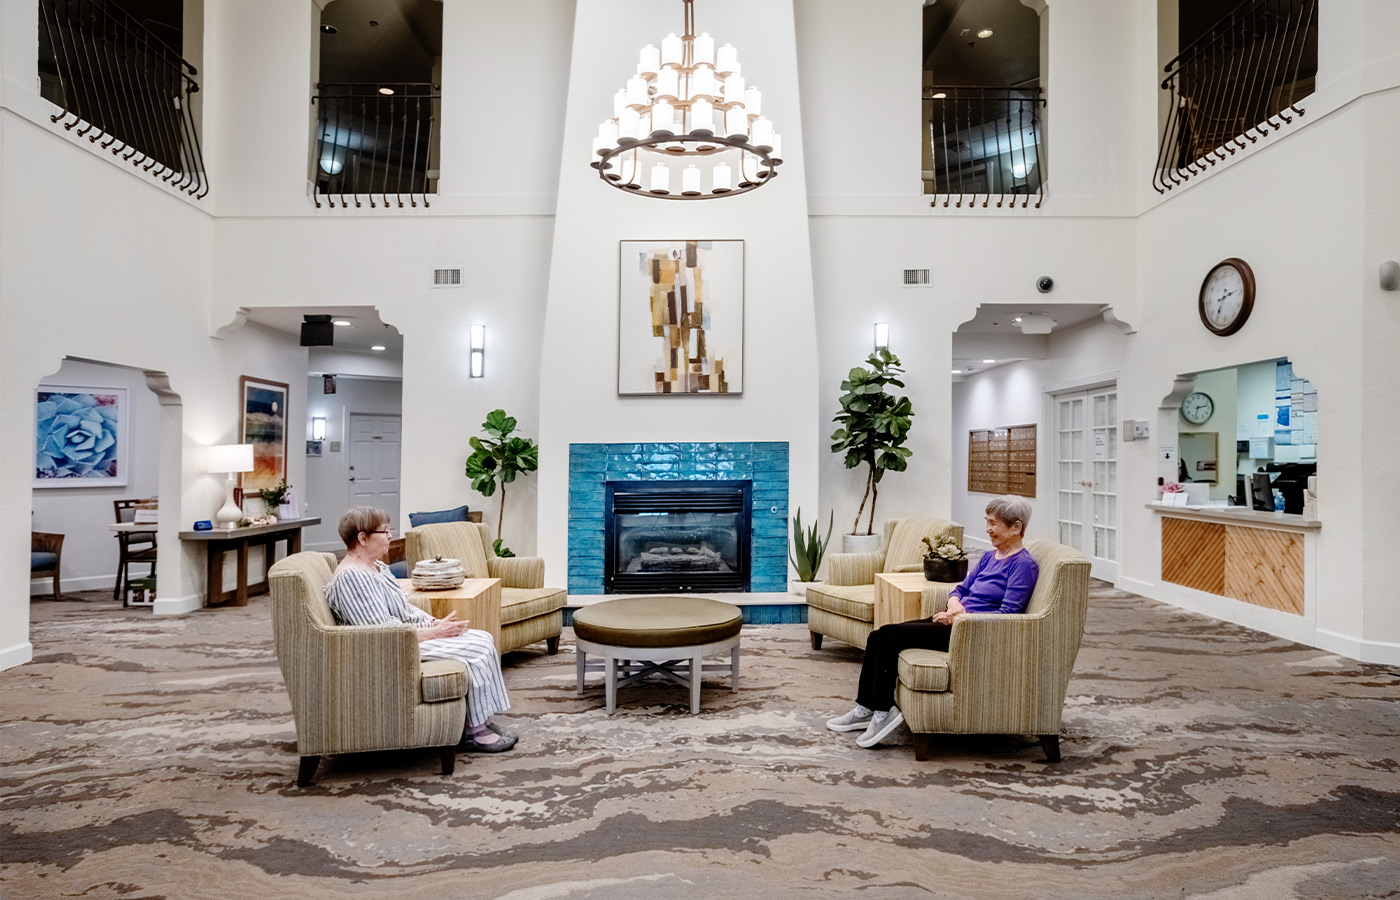 A lobby with people sitting in chairs.